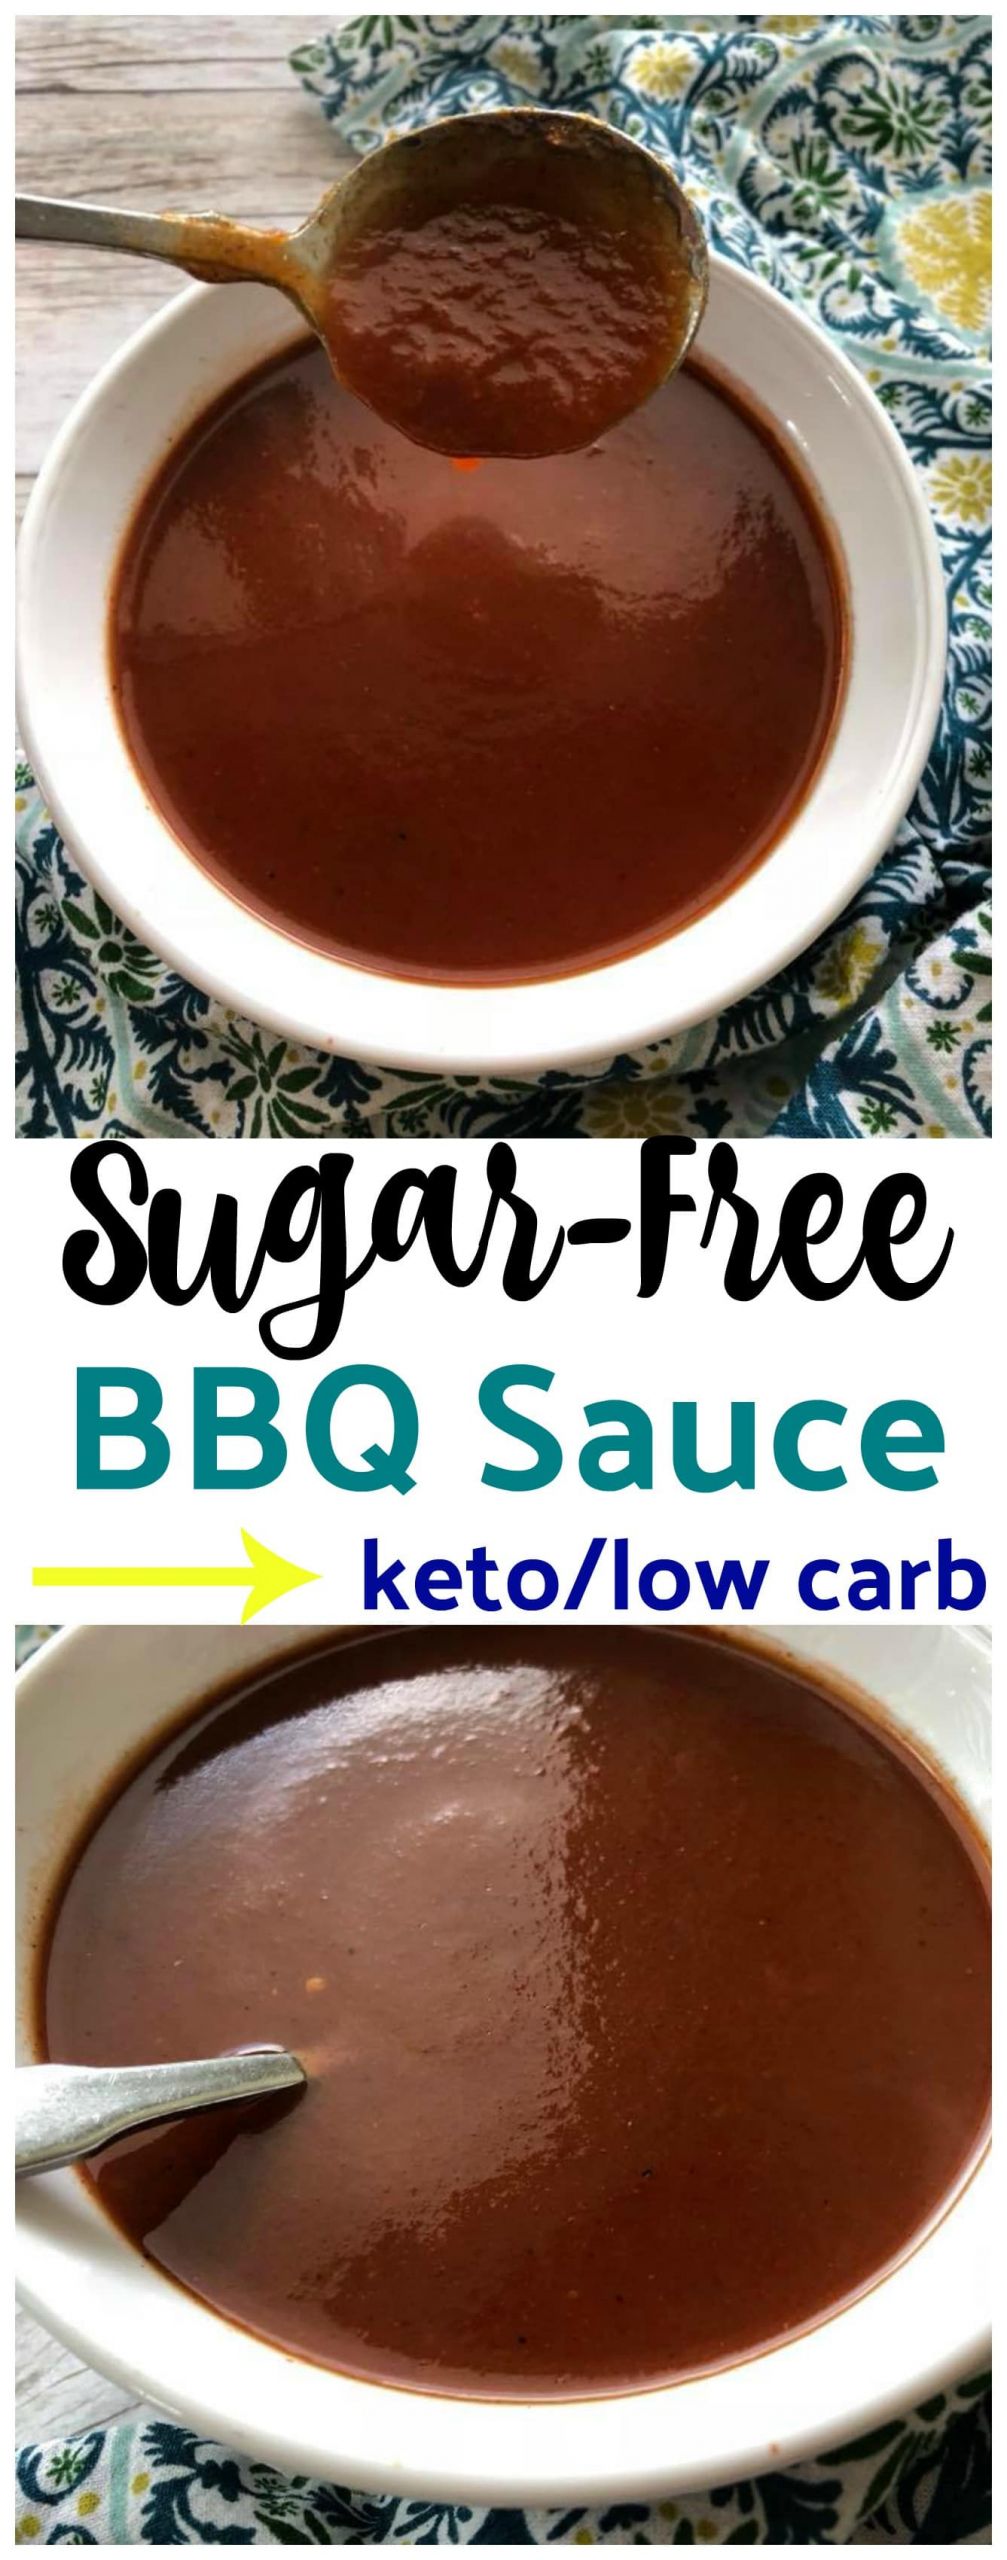 Bbq Sauce Without Sugar
 Homemade Low Carb Sugar Free BBQ Sauce keto friendly